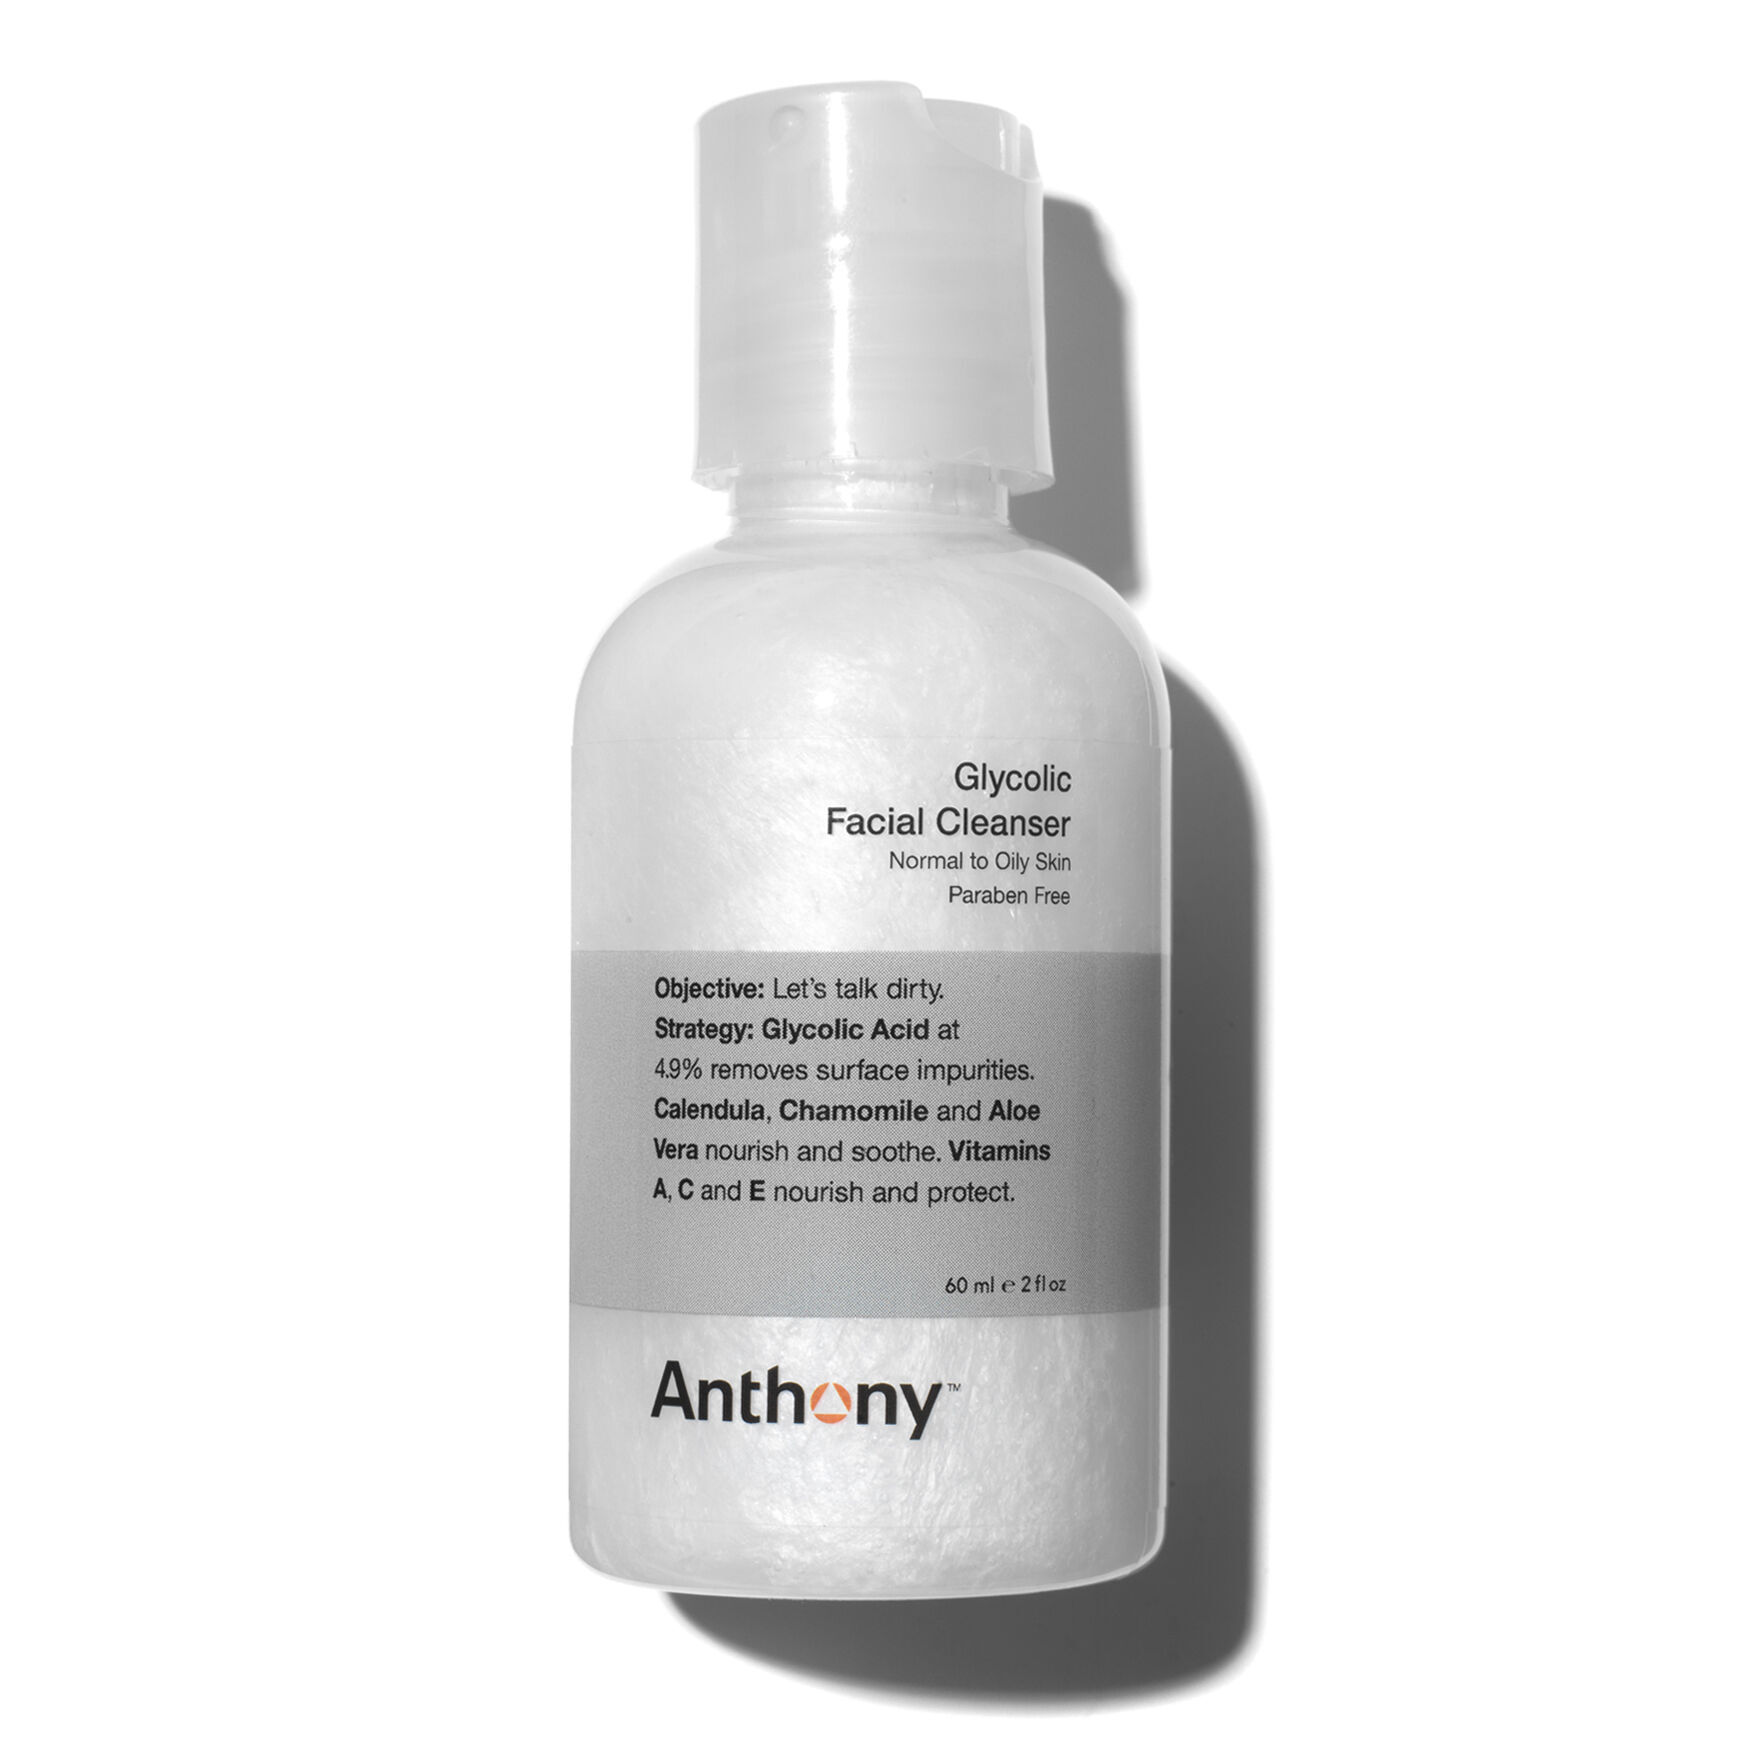 Anthony - Glycolic Facial Cleanser by Anthony